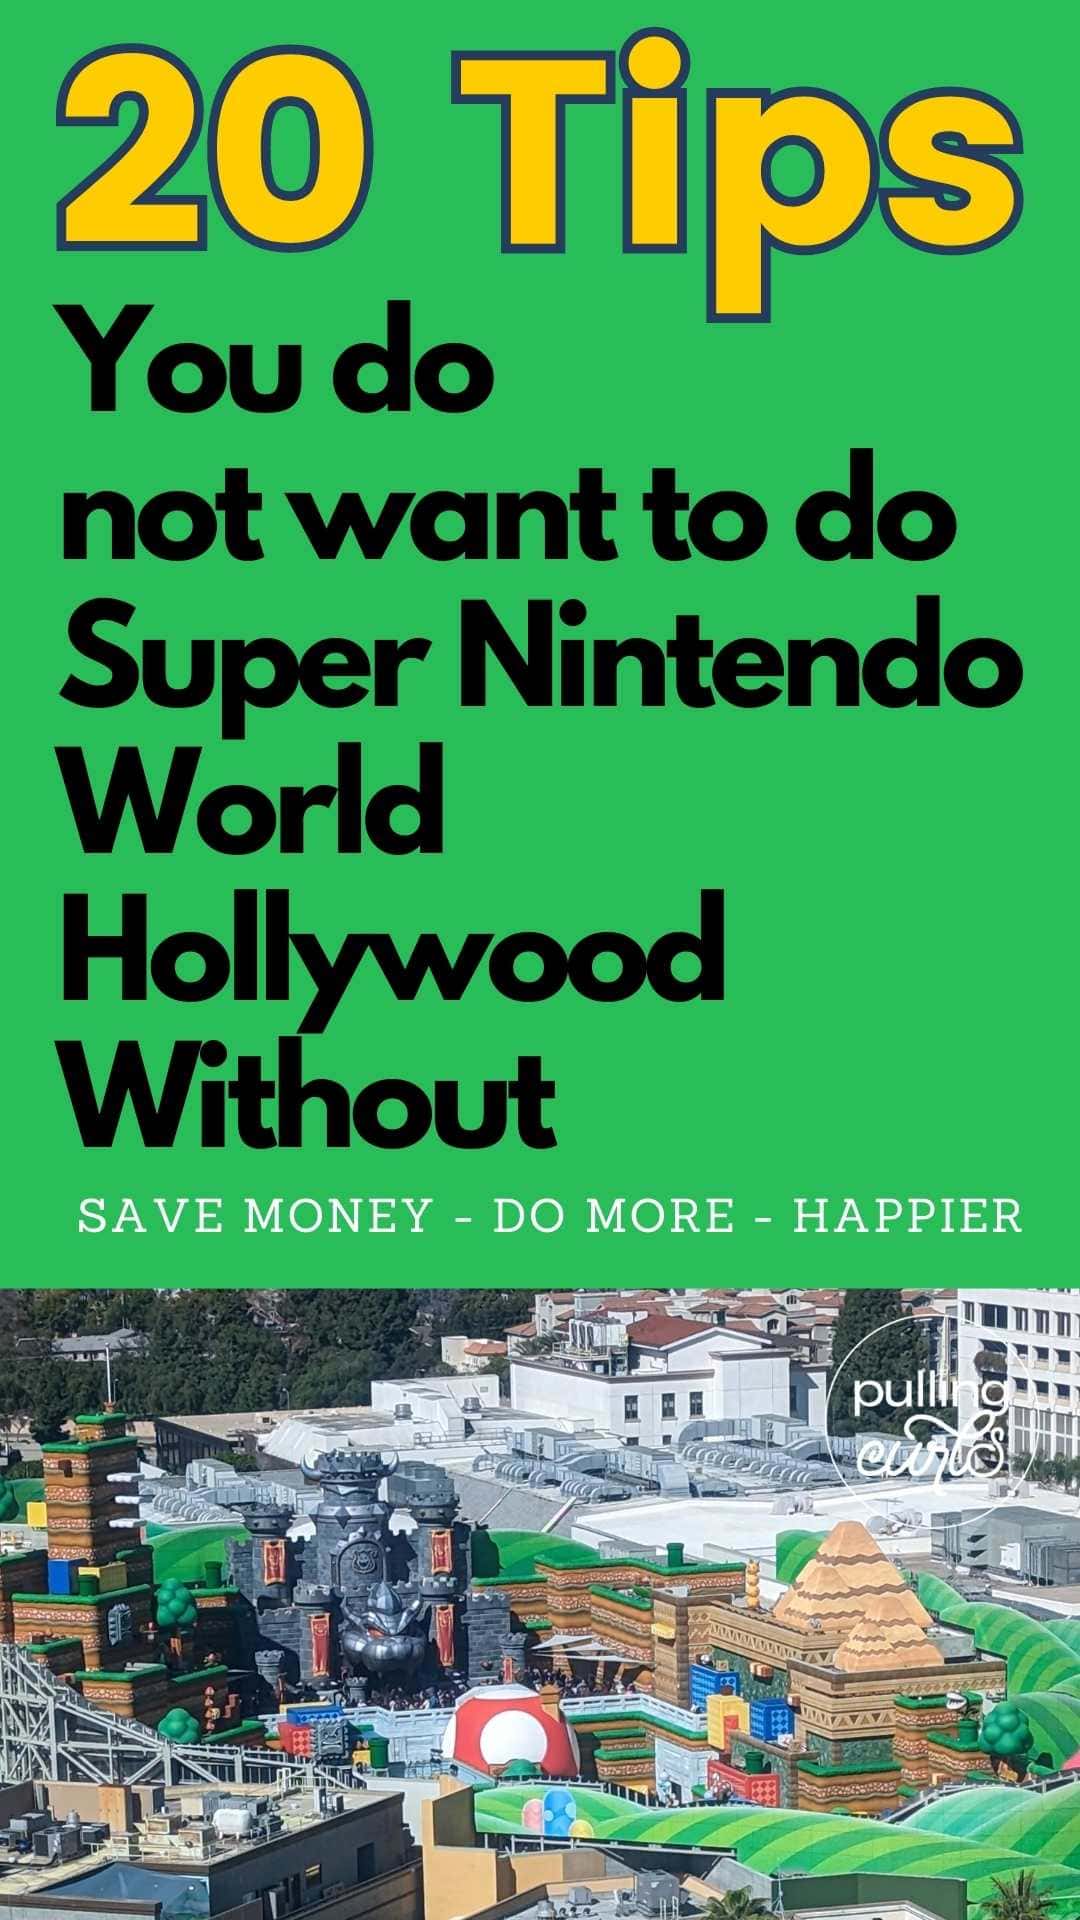 Unlock the hidden secrets of Universal Studios Hollywood's Super Nintendo World with exclusive tips and tricks! Find out how to maximize your visit to this gaming paradise and emerge as the ultimate champion. via @pullingcurls